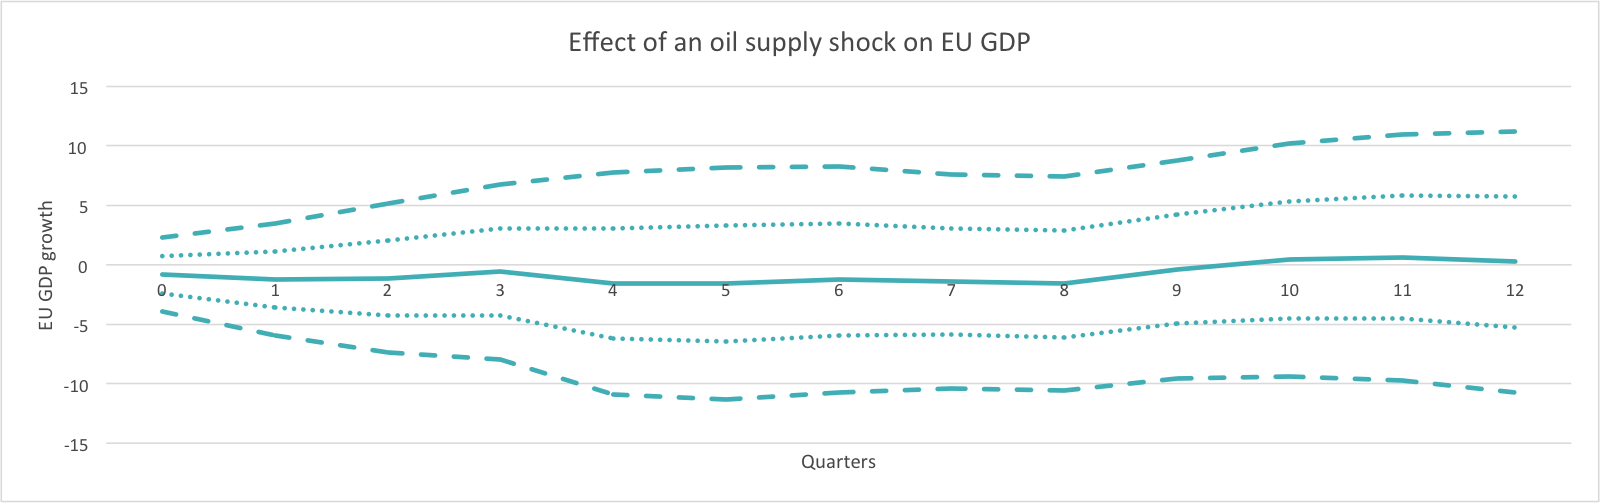 Effect of an Oil Supply Shock on EU GDP